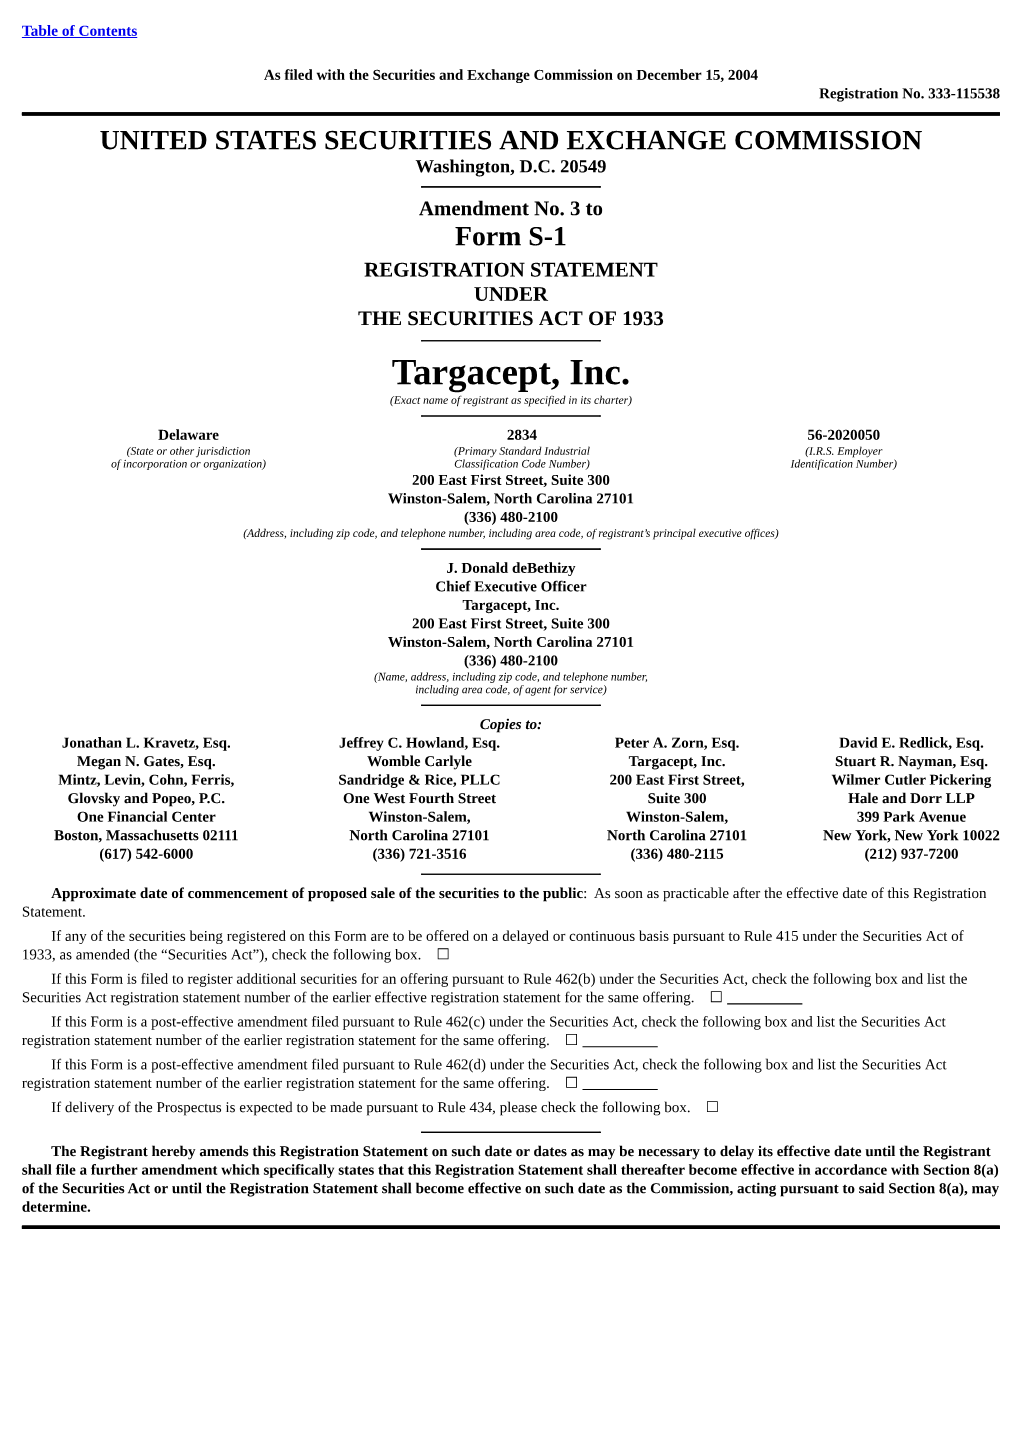 Targacept, Inc. (Exact Name of Registrant As Specified in Its Charter)